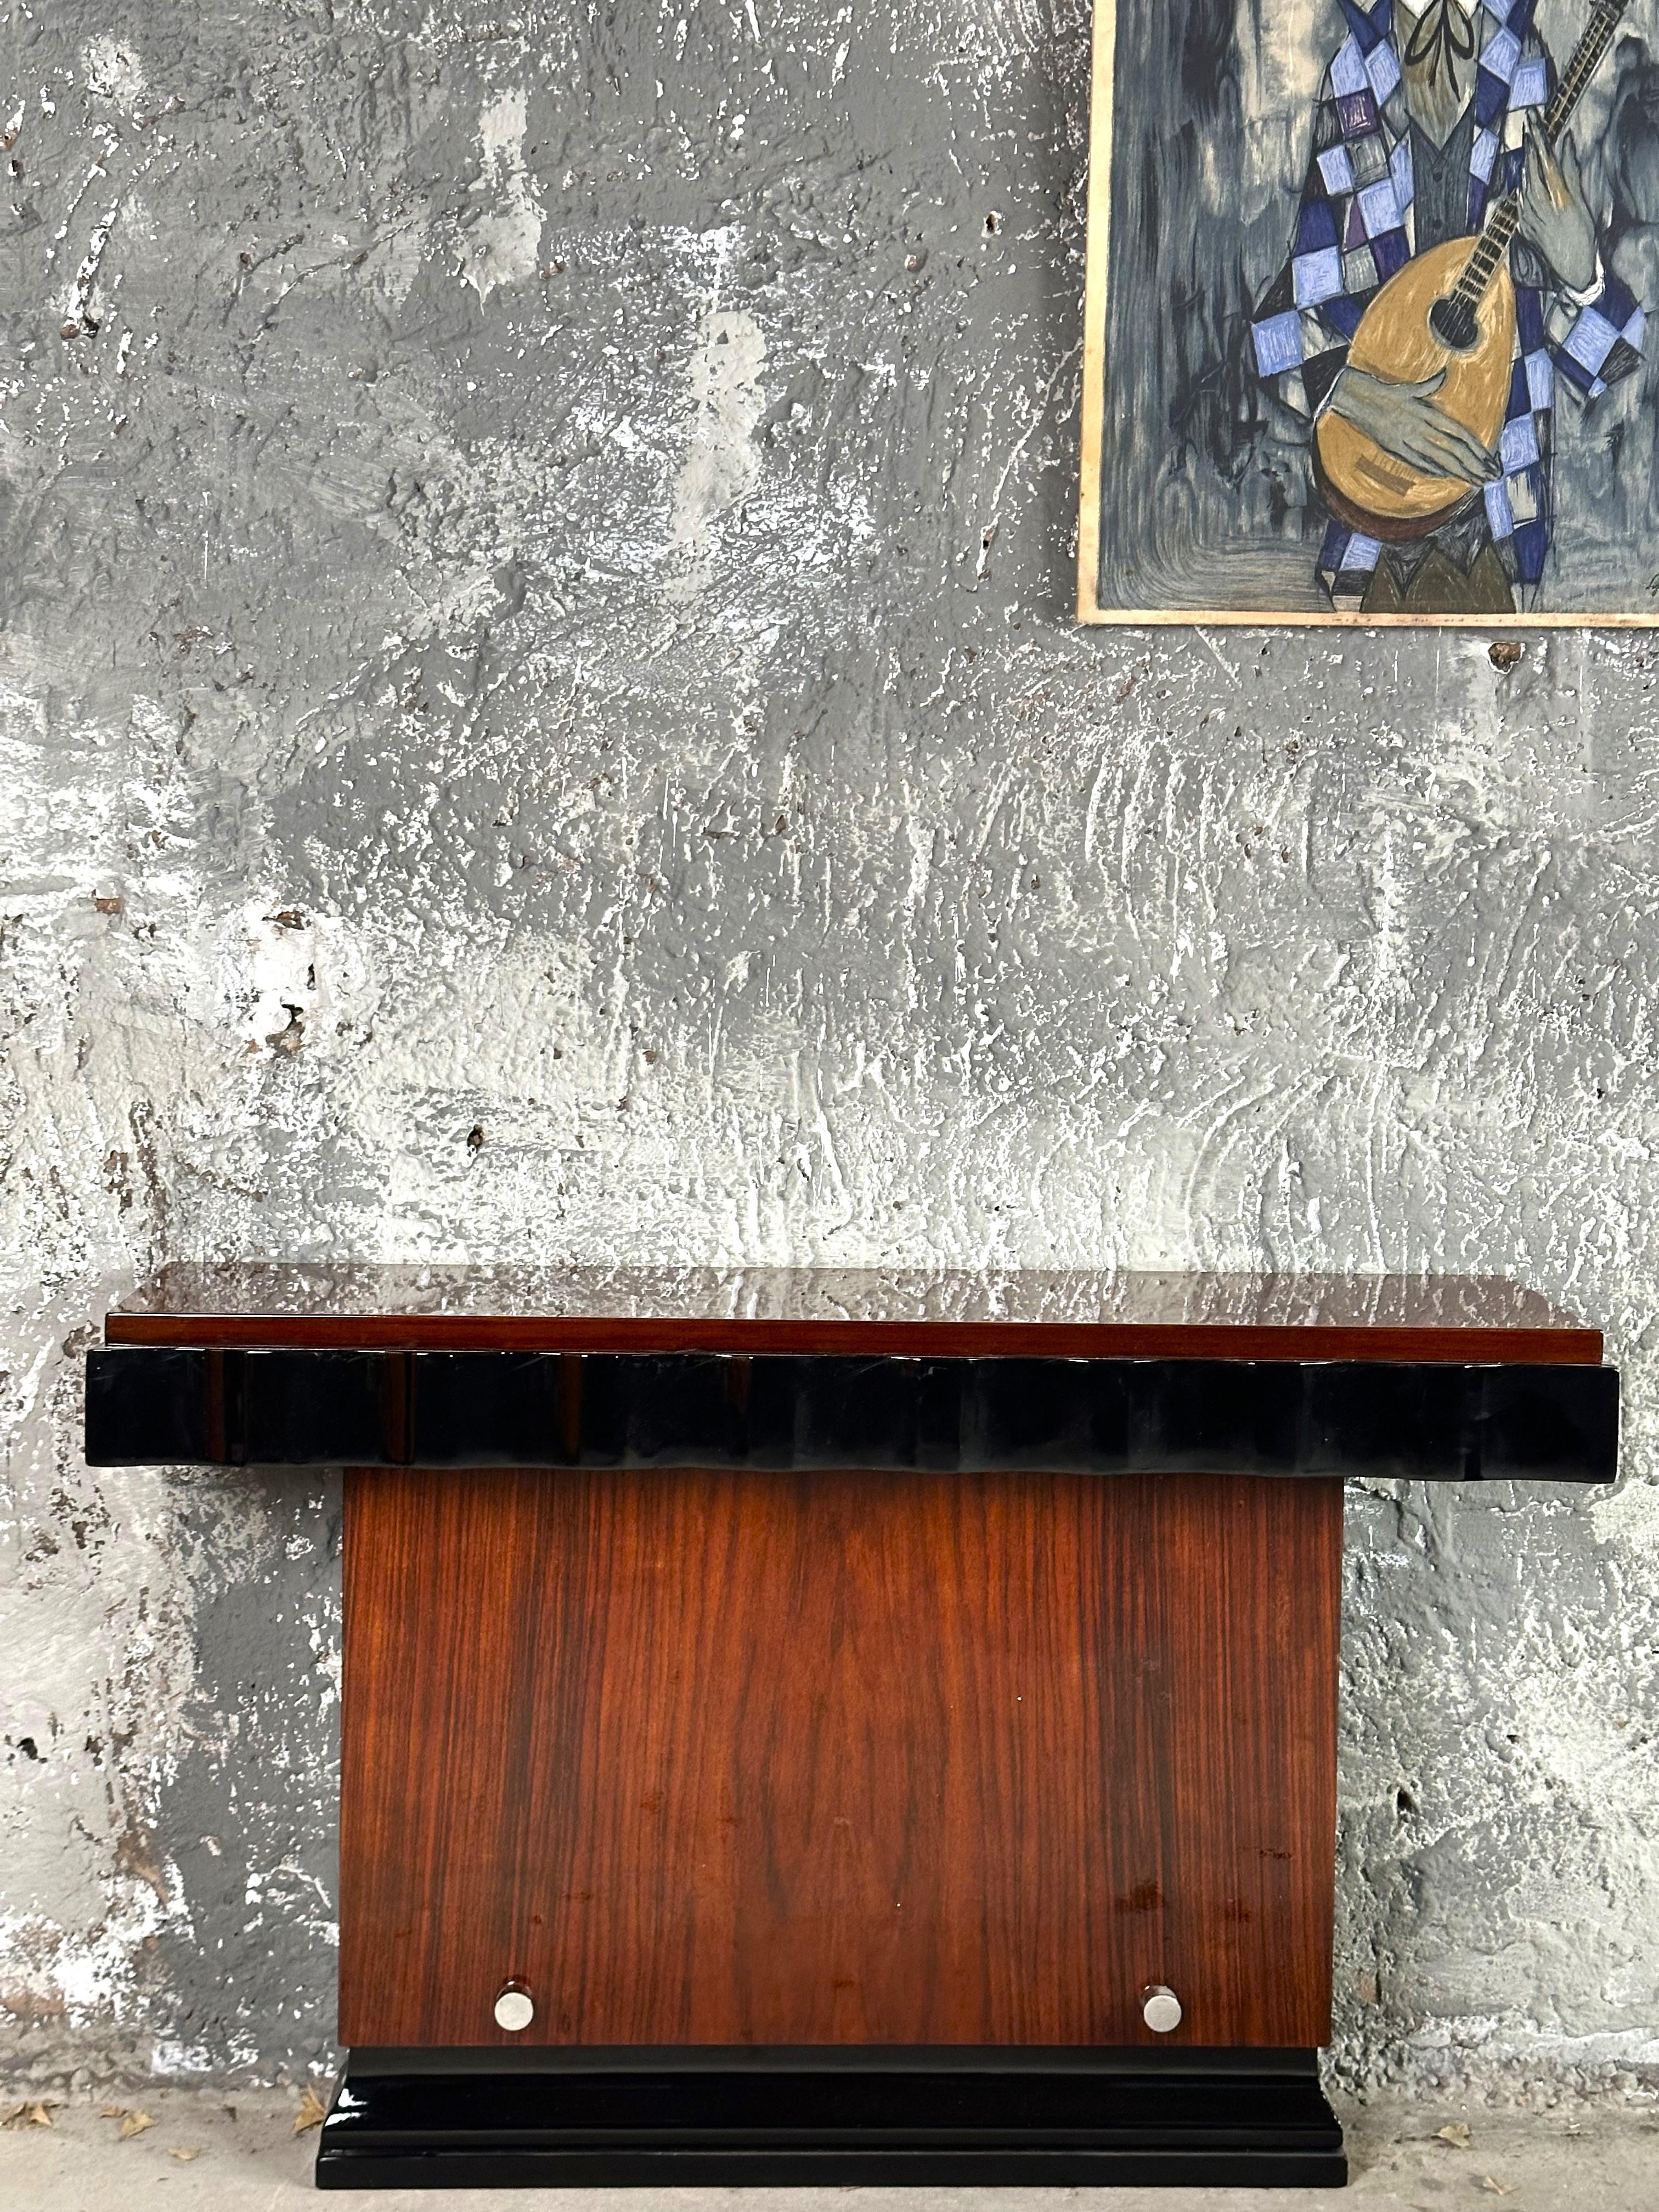 Art Deco Modernist Pair of Console Tables by Kristian Krass, France 1935 For Sale 8